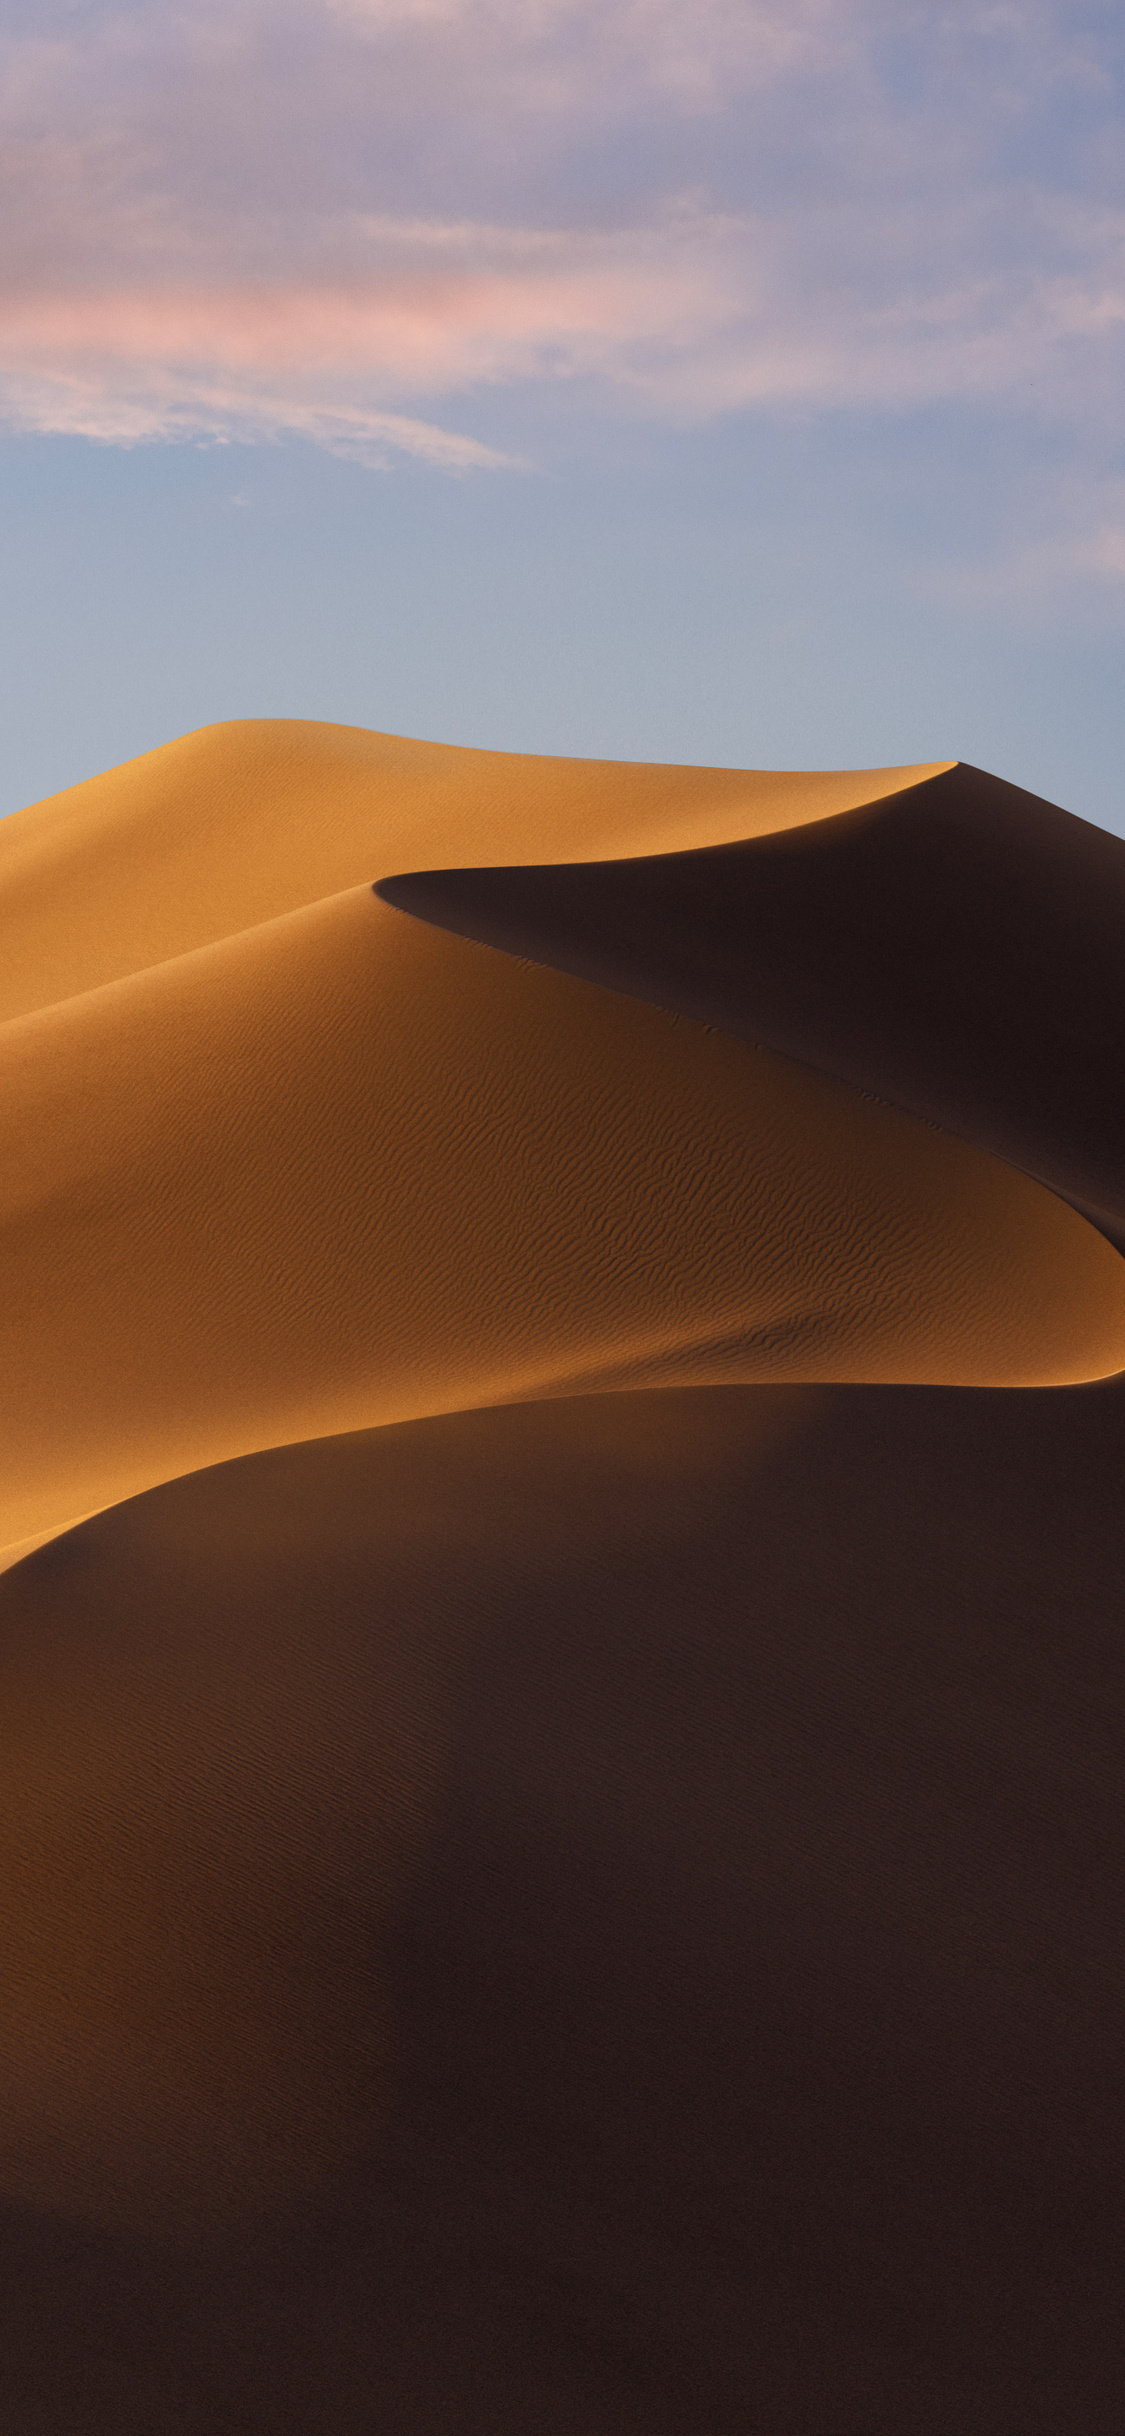 MacOS Mojave iPhone Wallpapers - Wallpaper Cave